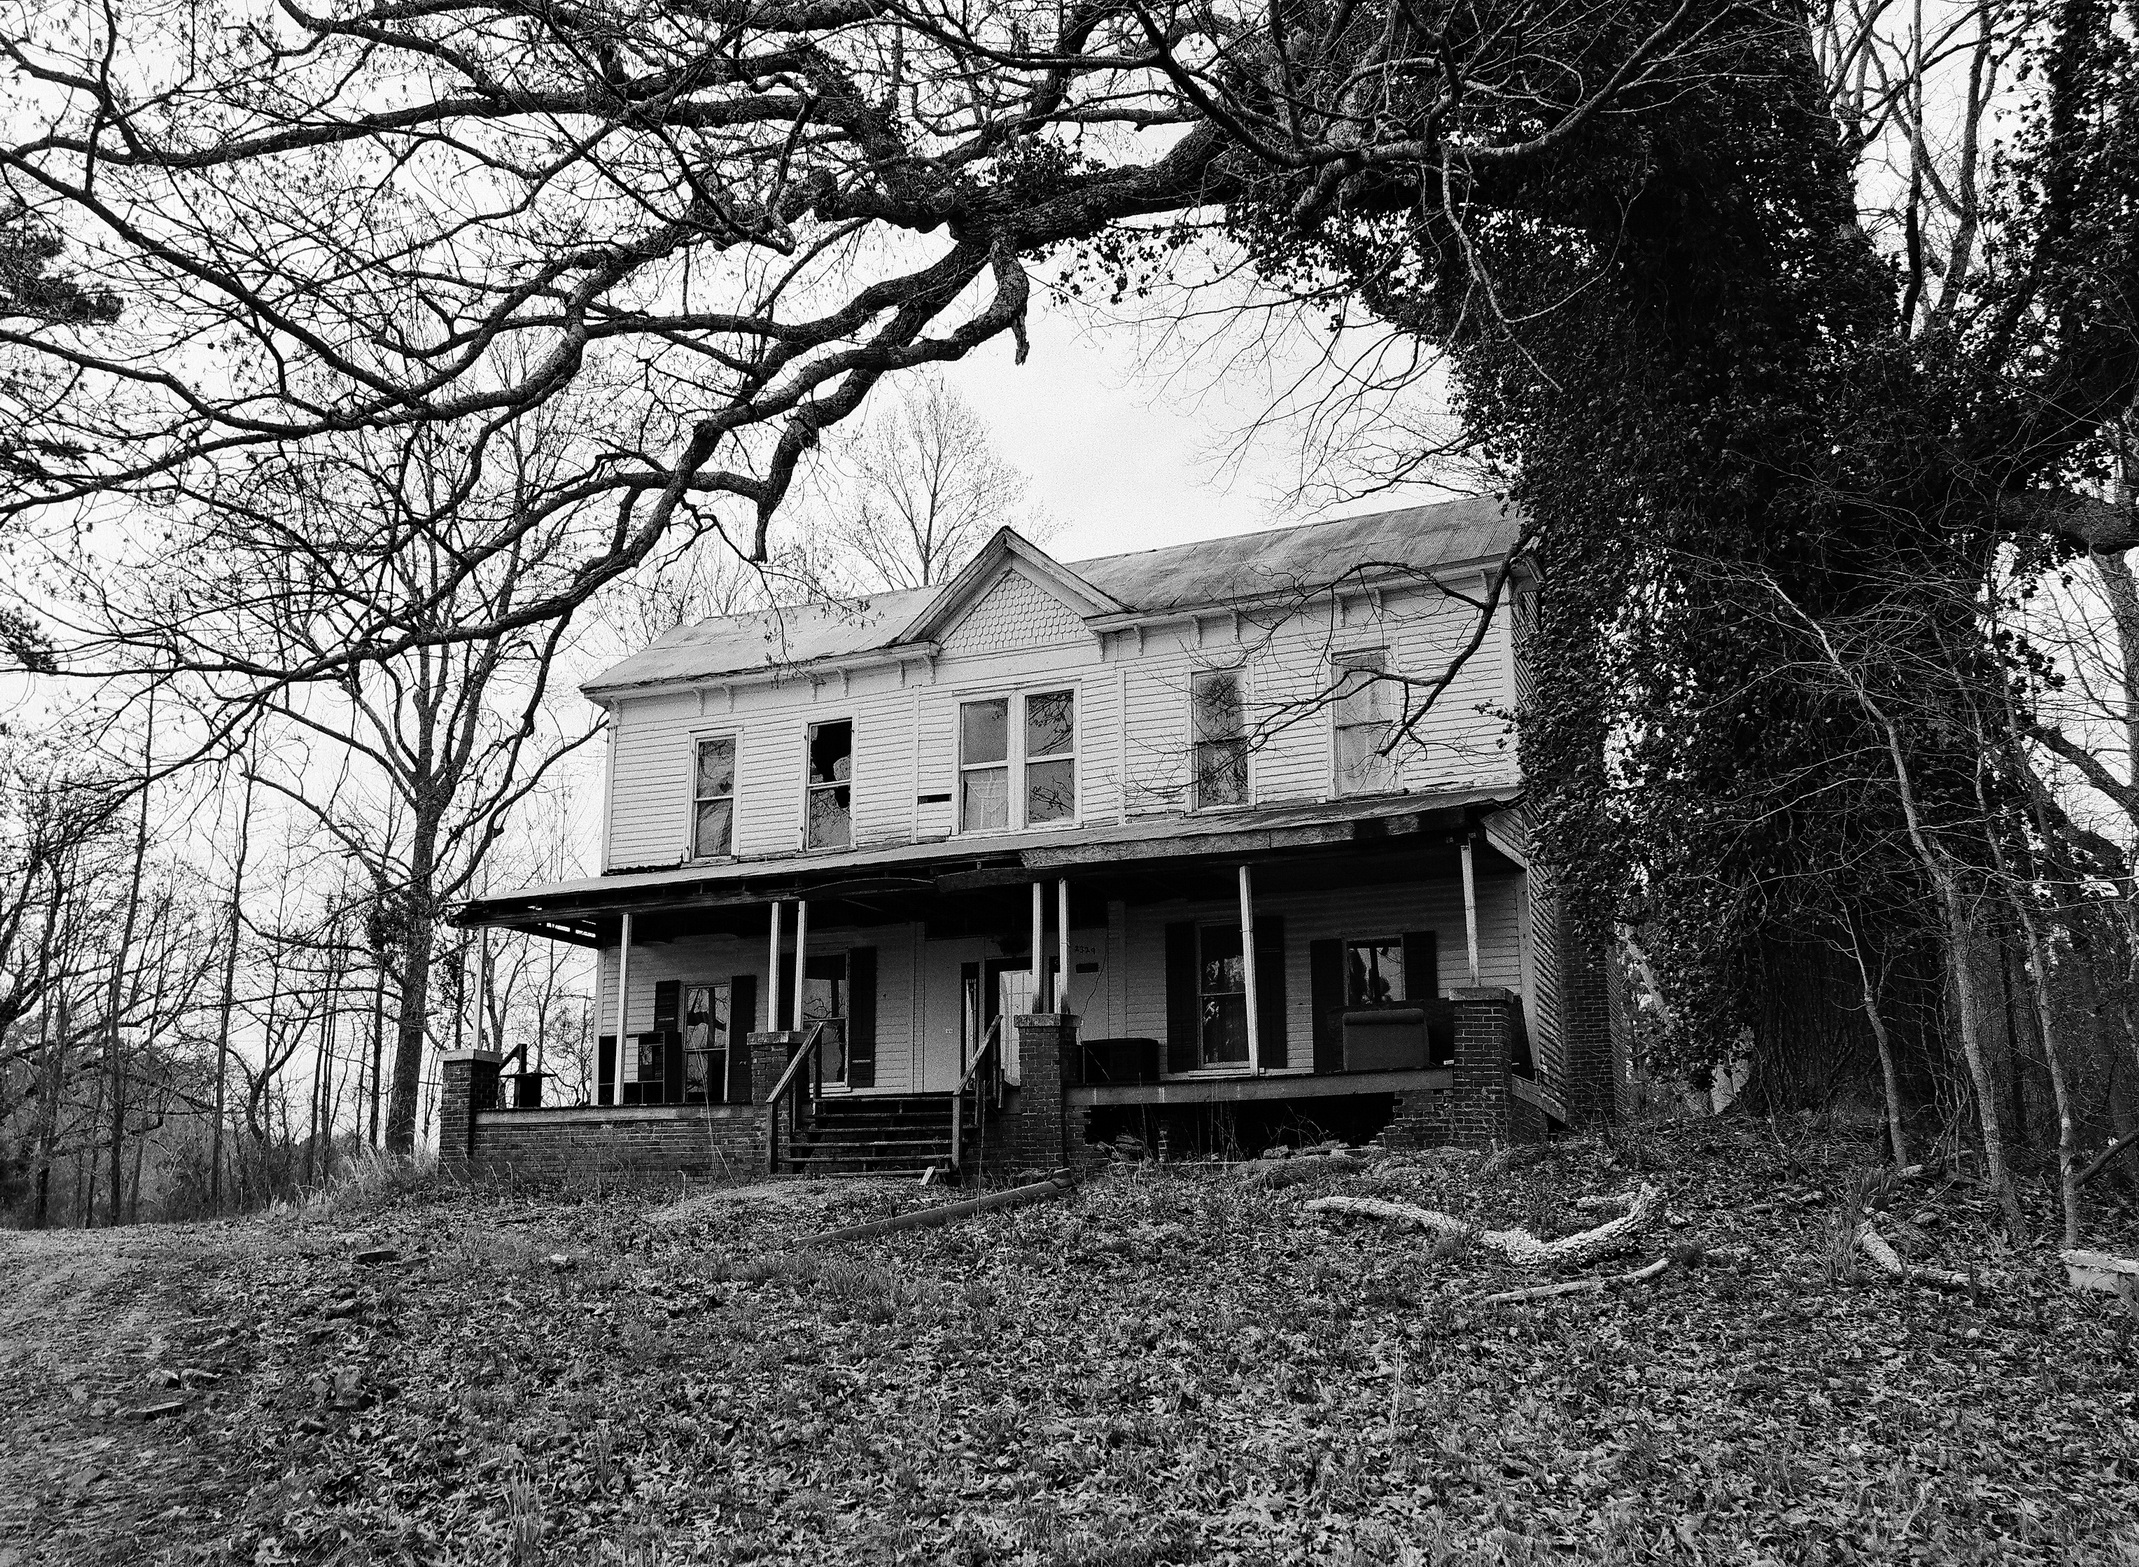  Revisiting the old house on a hill at the intersection of Hwy 370 and 9 in Union County, this time with a medium format camera. &nbsp;Image captured using a Pentax 645A camera with a 45mm f/2.8 lens on Ilford HP5 Plus 400 film. &nbsp;There's just so